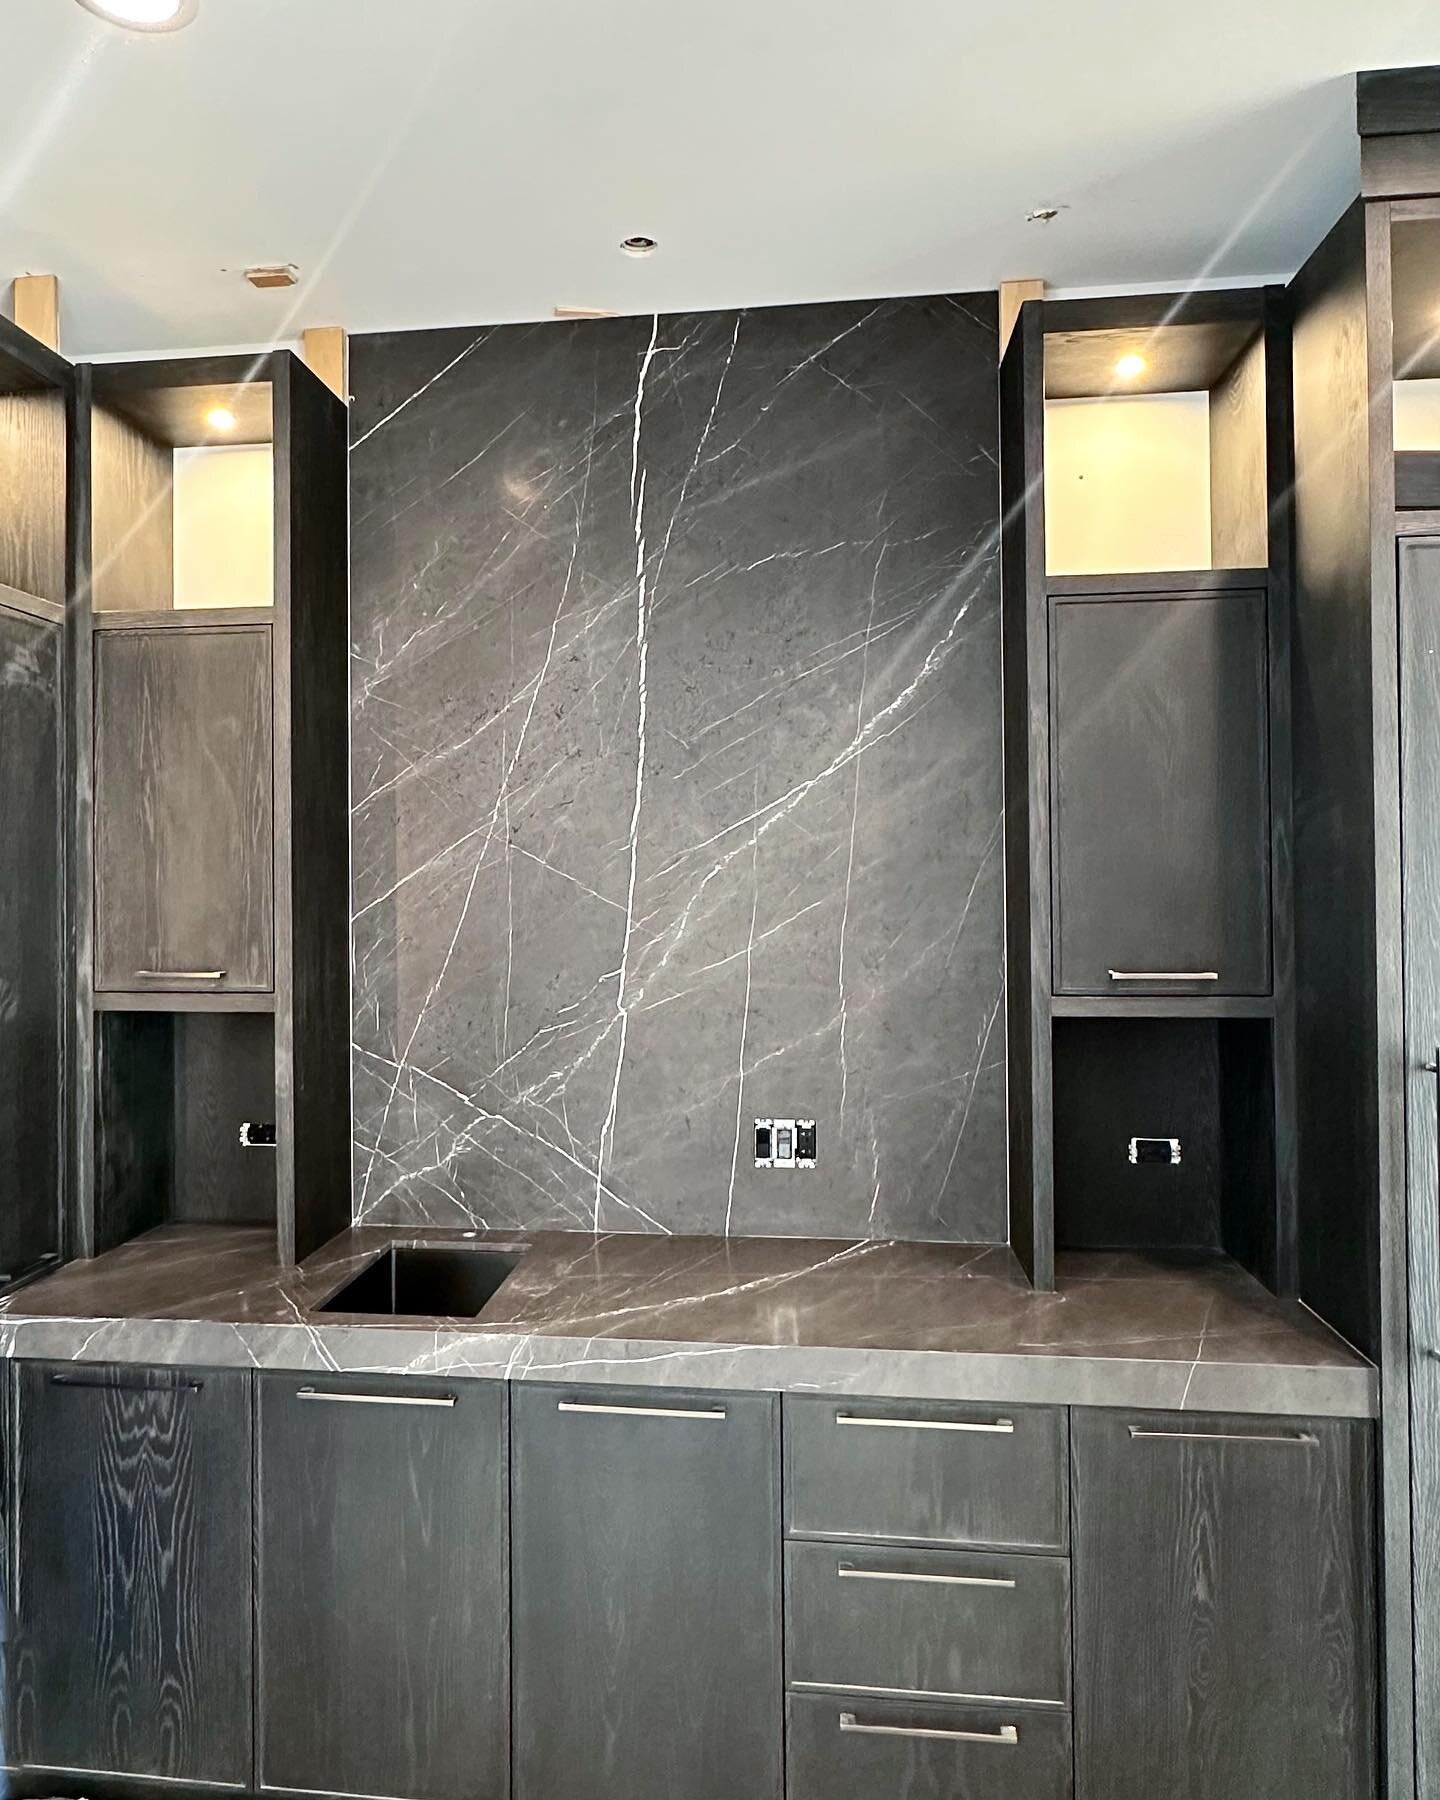 Dramatic Grafite marble completing this home bar #grafite #grafitemarble #grafitegreekmarble #greekmarble #homebar #marble #marbleslab Fabricator: @terrastonedesign Supplier: @terrastonegallery Builder: @greenside_design_build